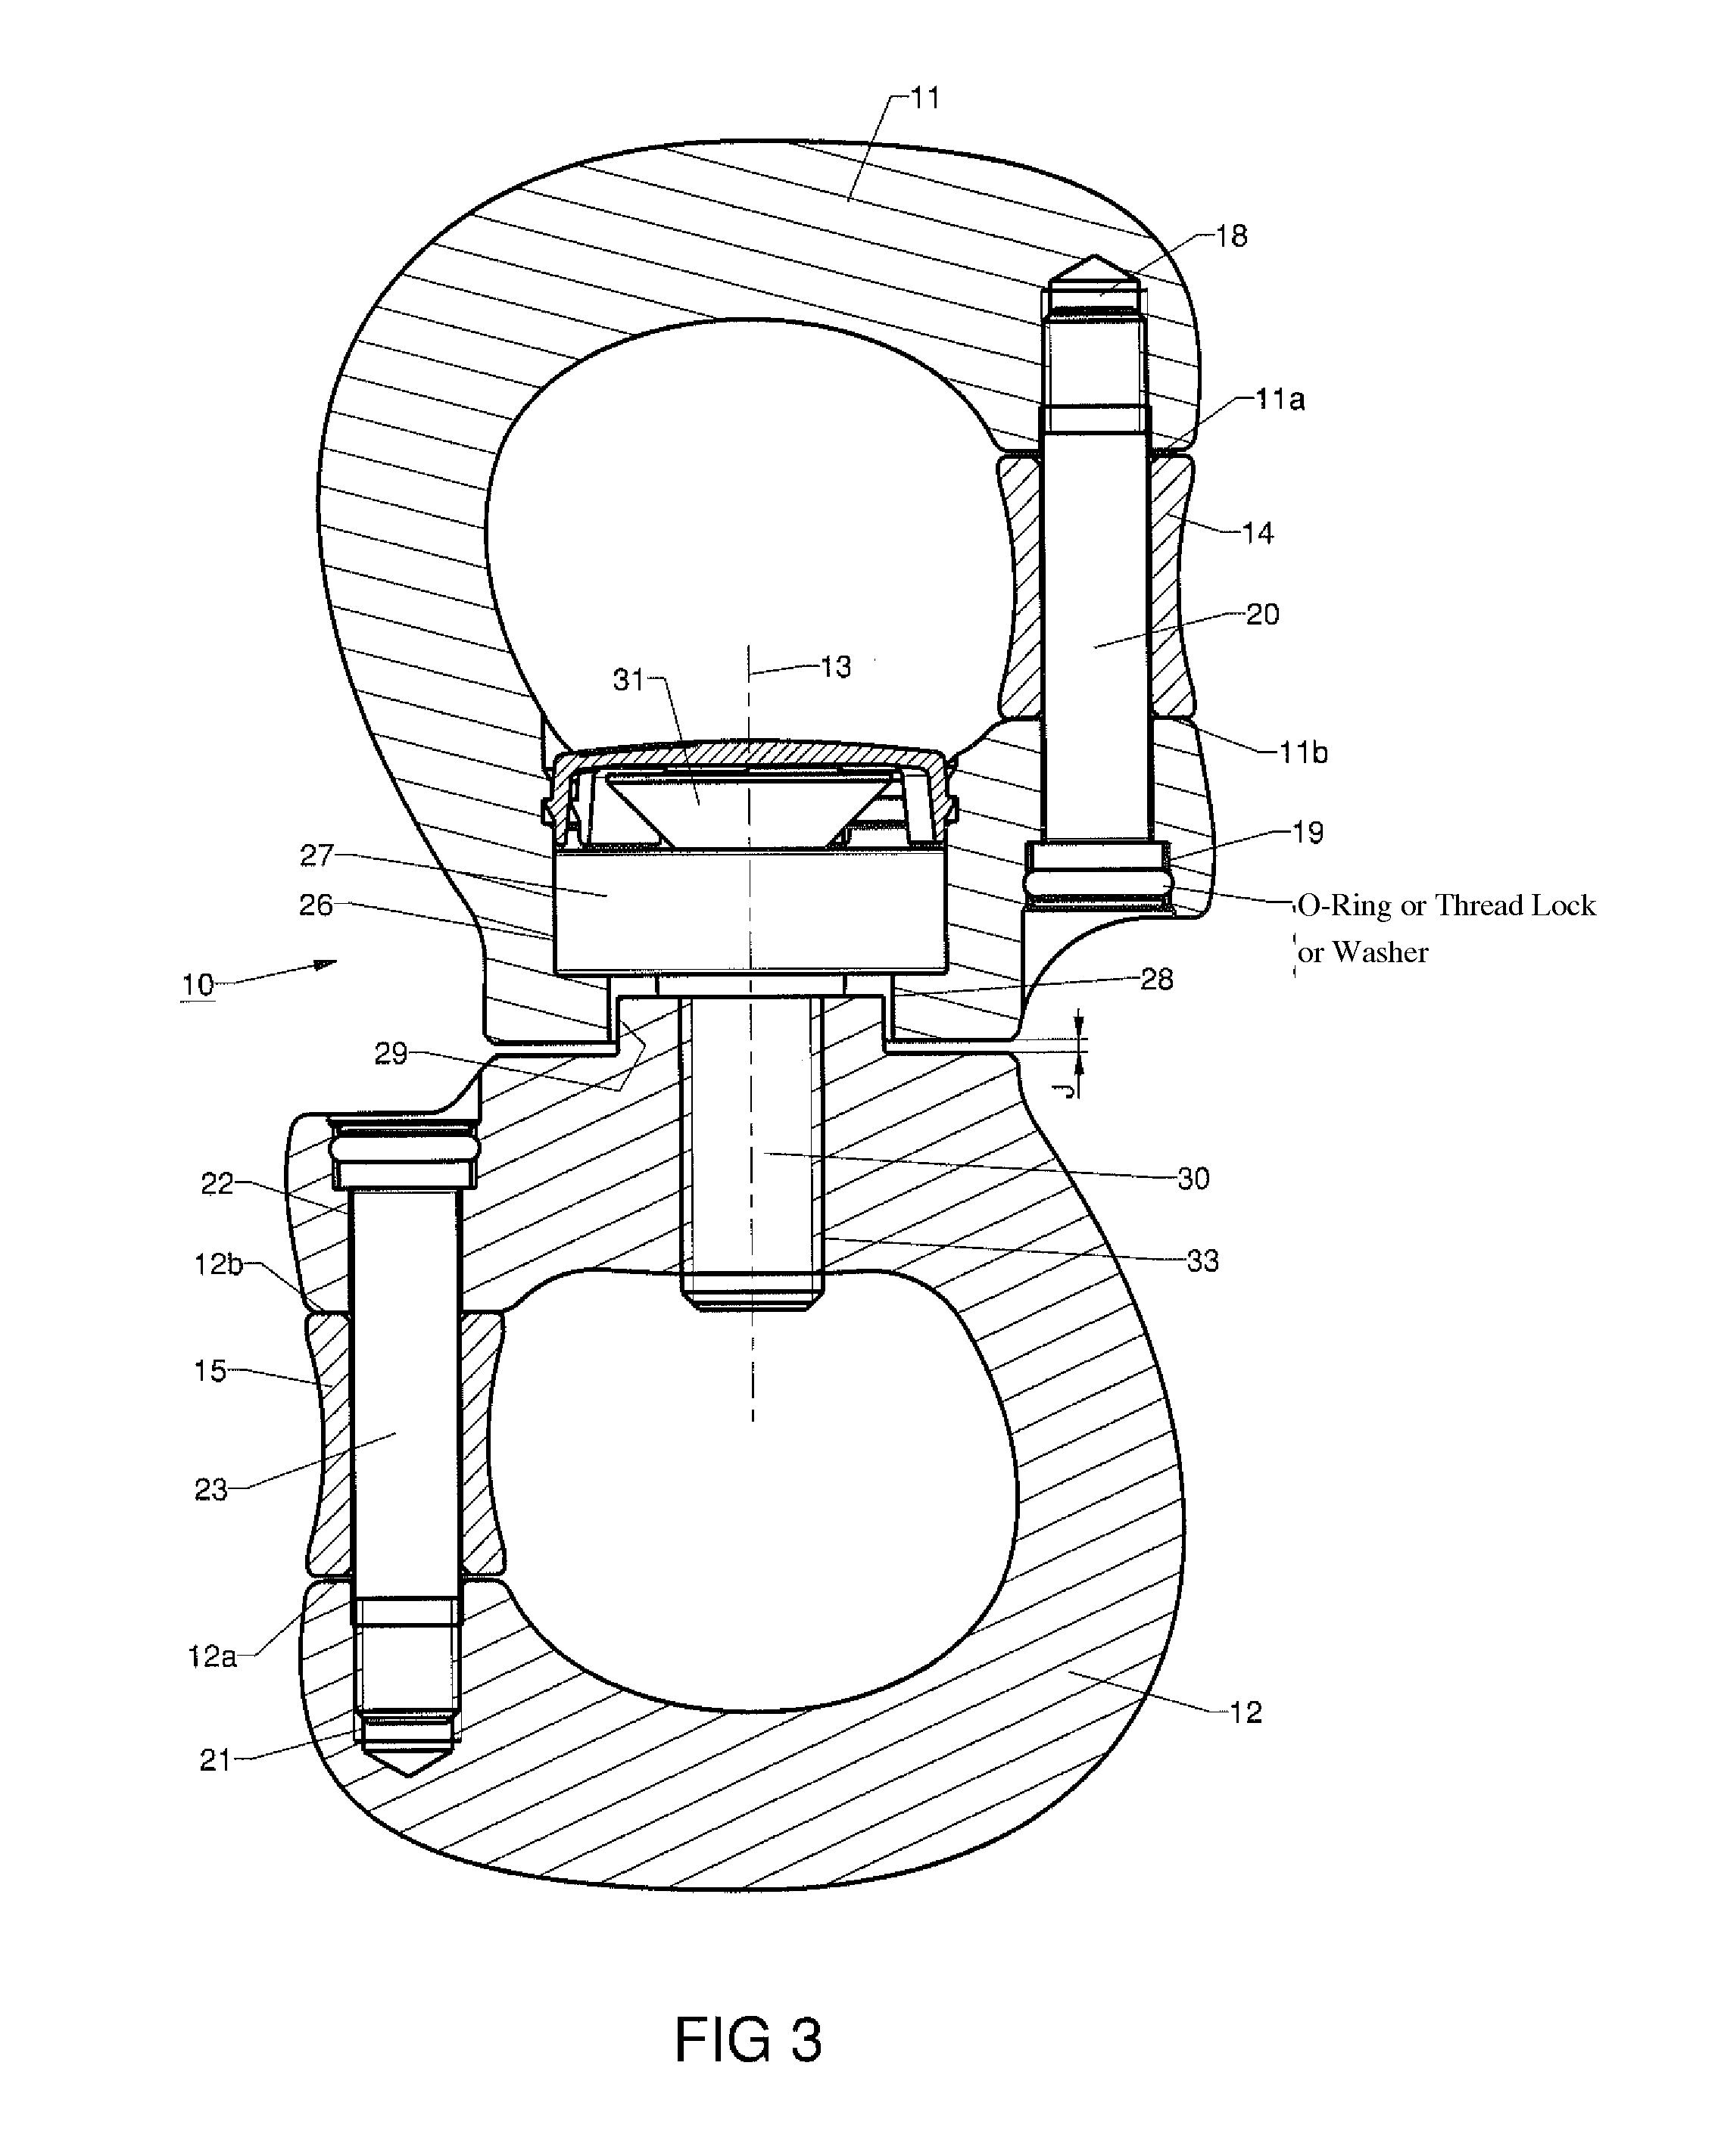 Attachment device with improved openable swivel